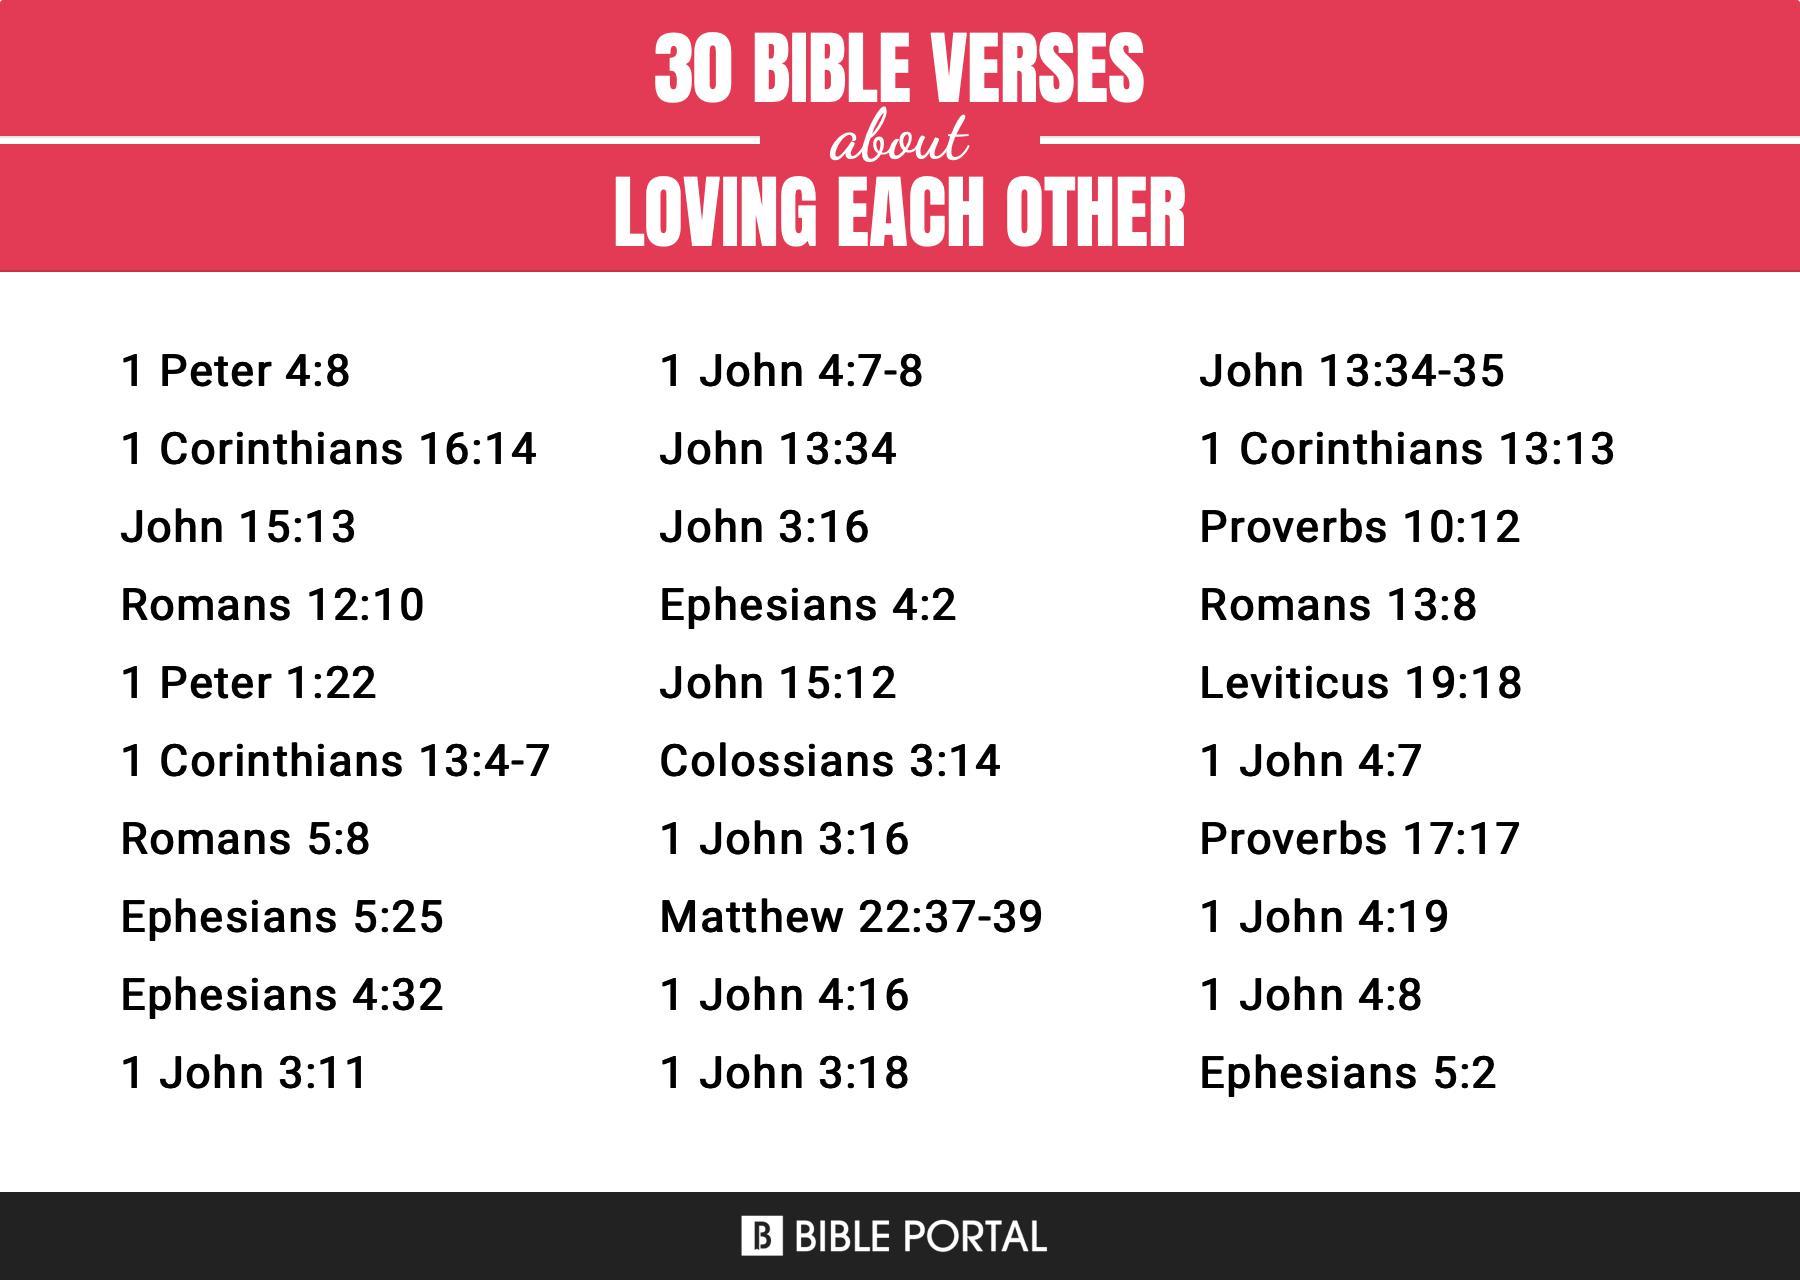 What Does the Bible Say about Loving Each Other?